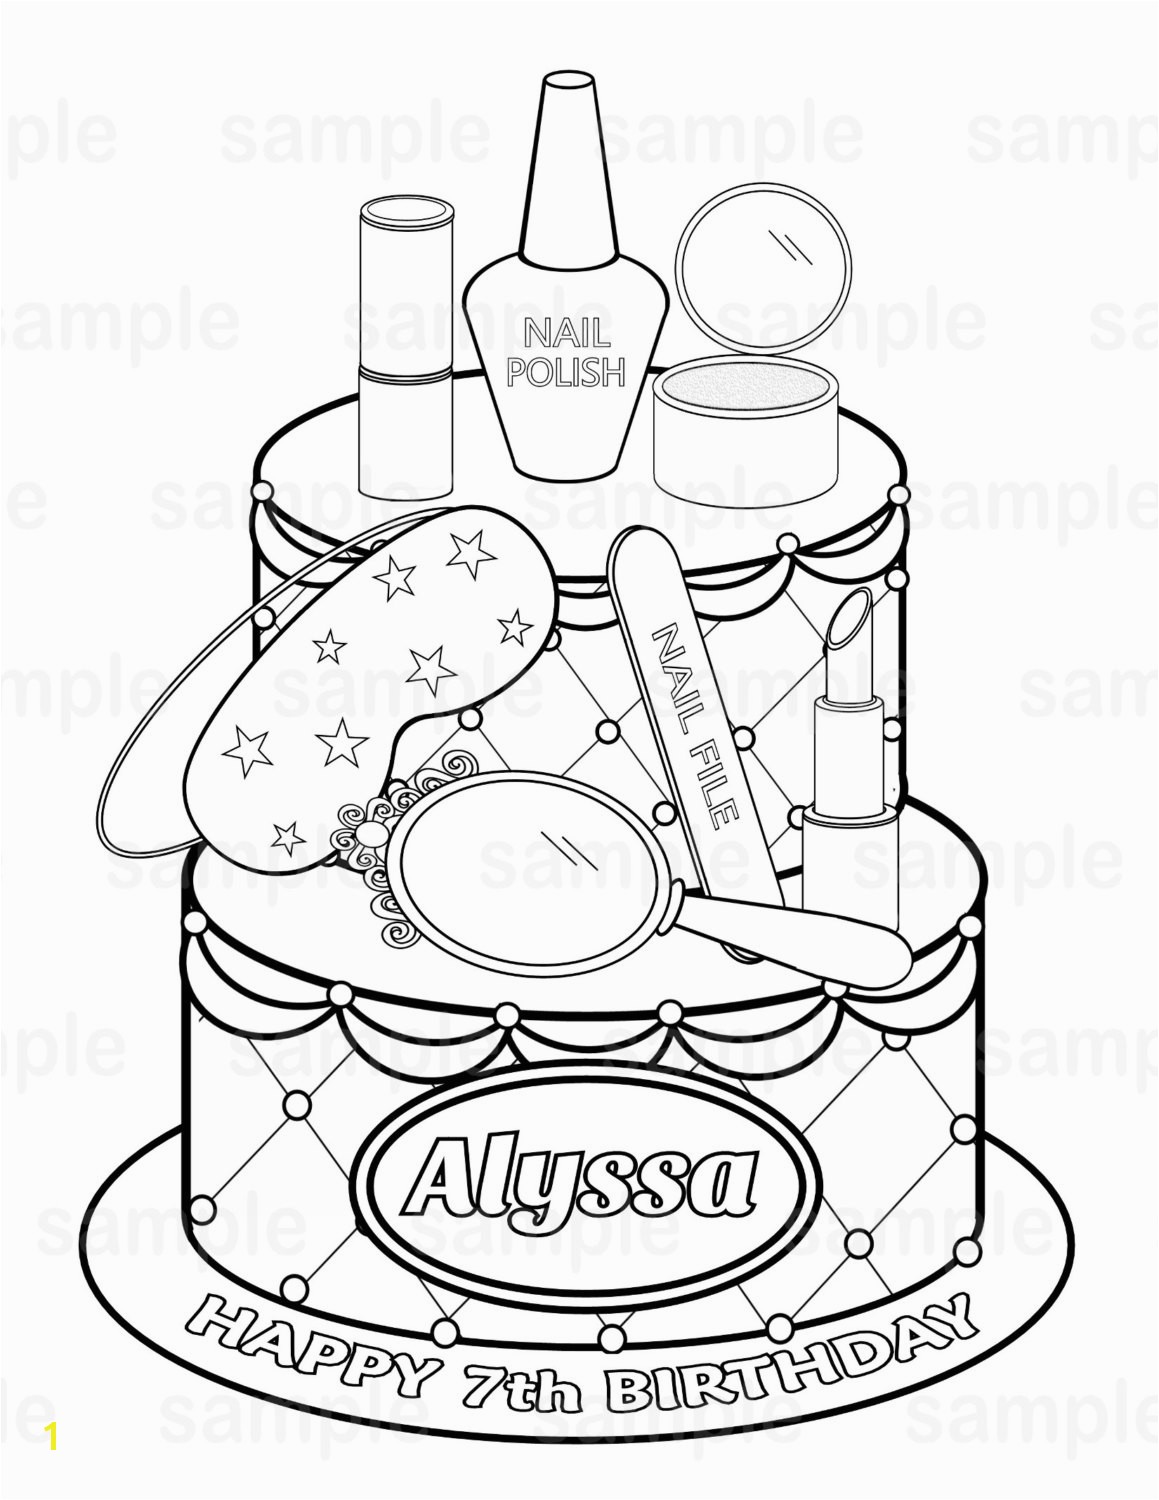 Best Nail Salon Coloring Pages Spa Themed Download And Print For Free